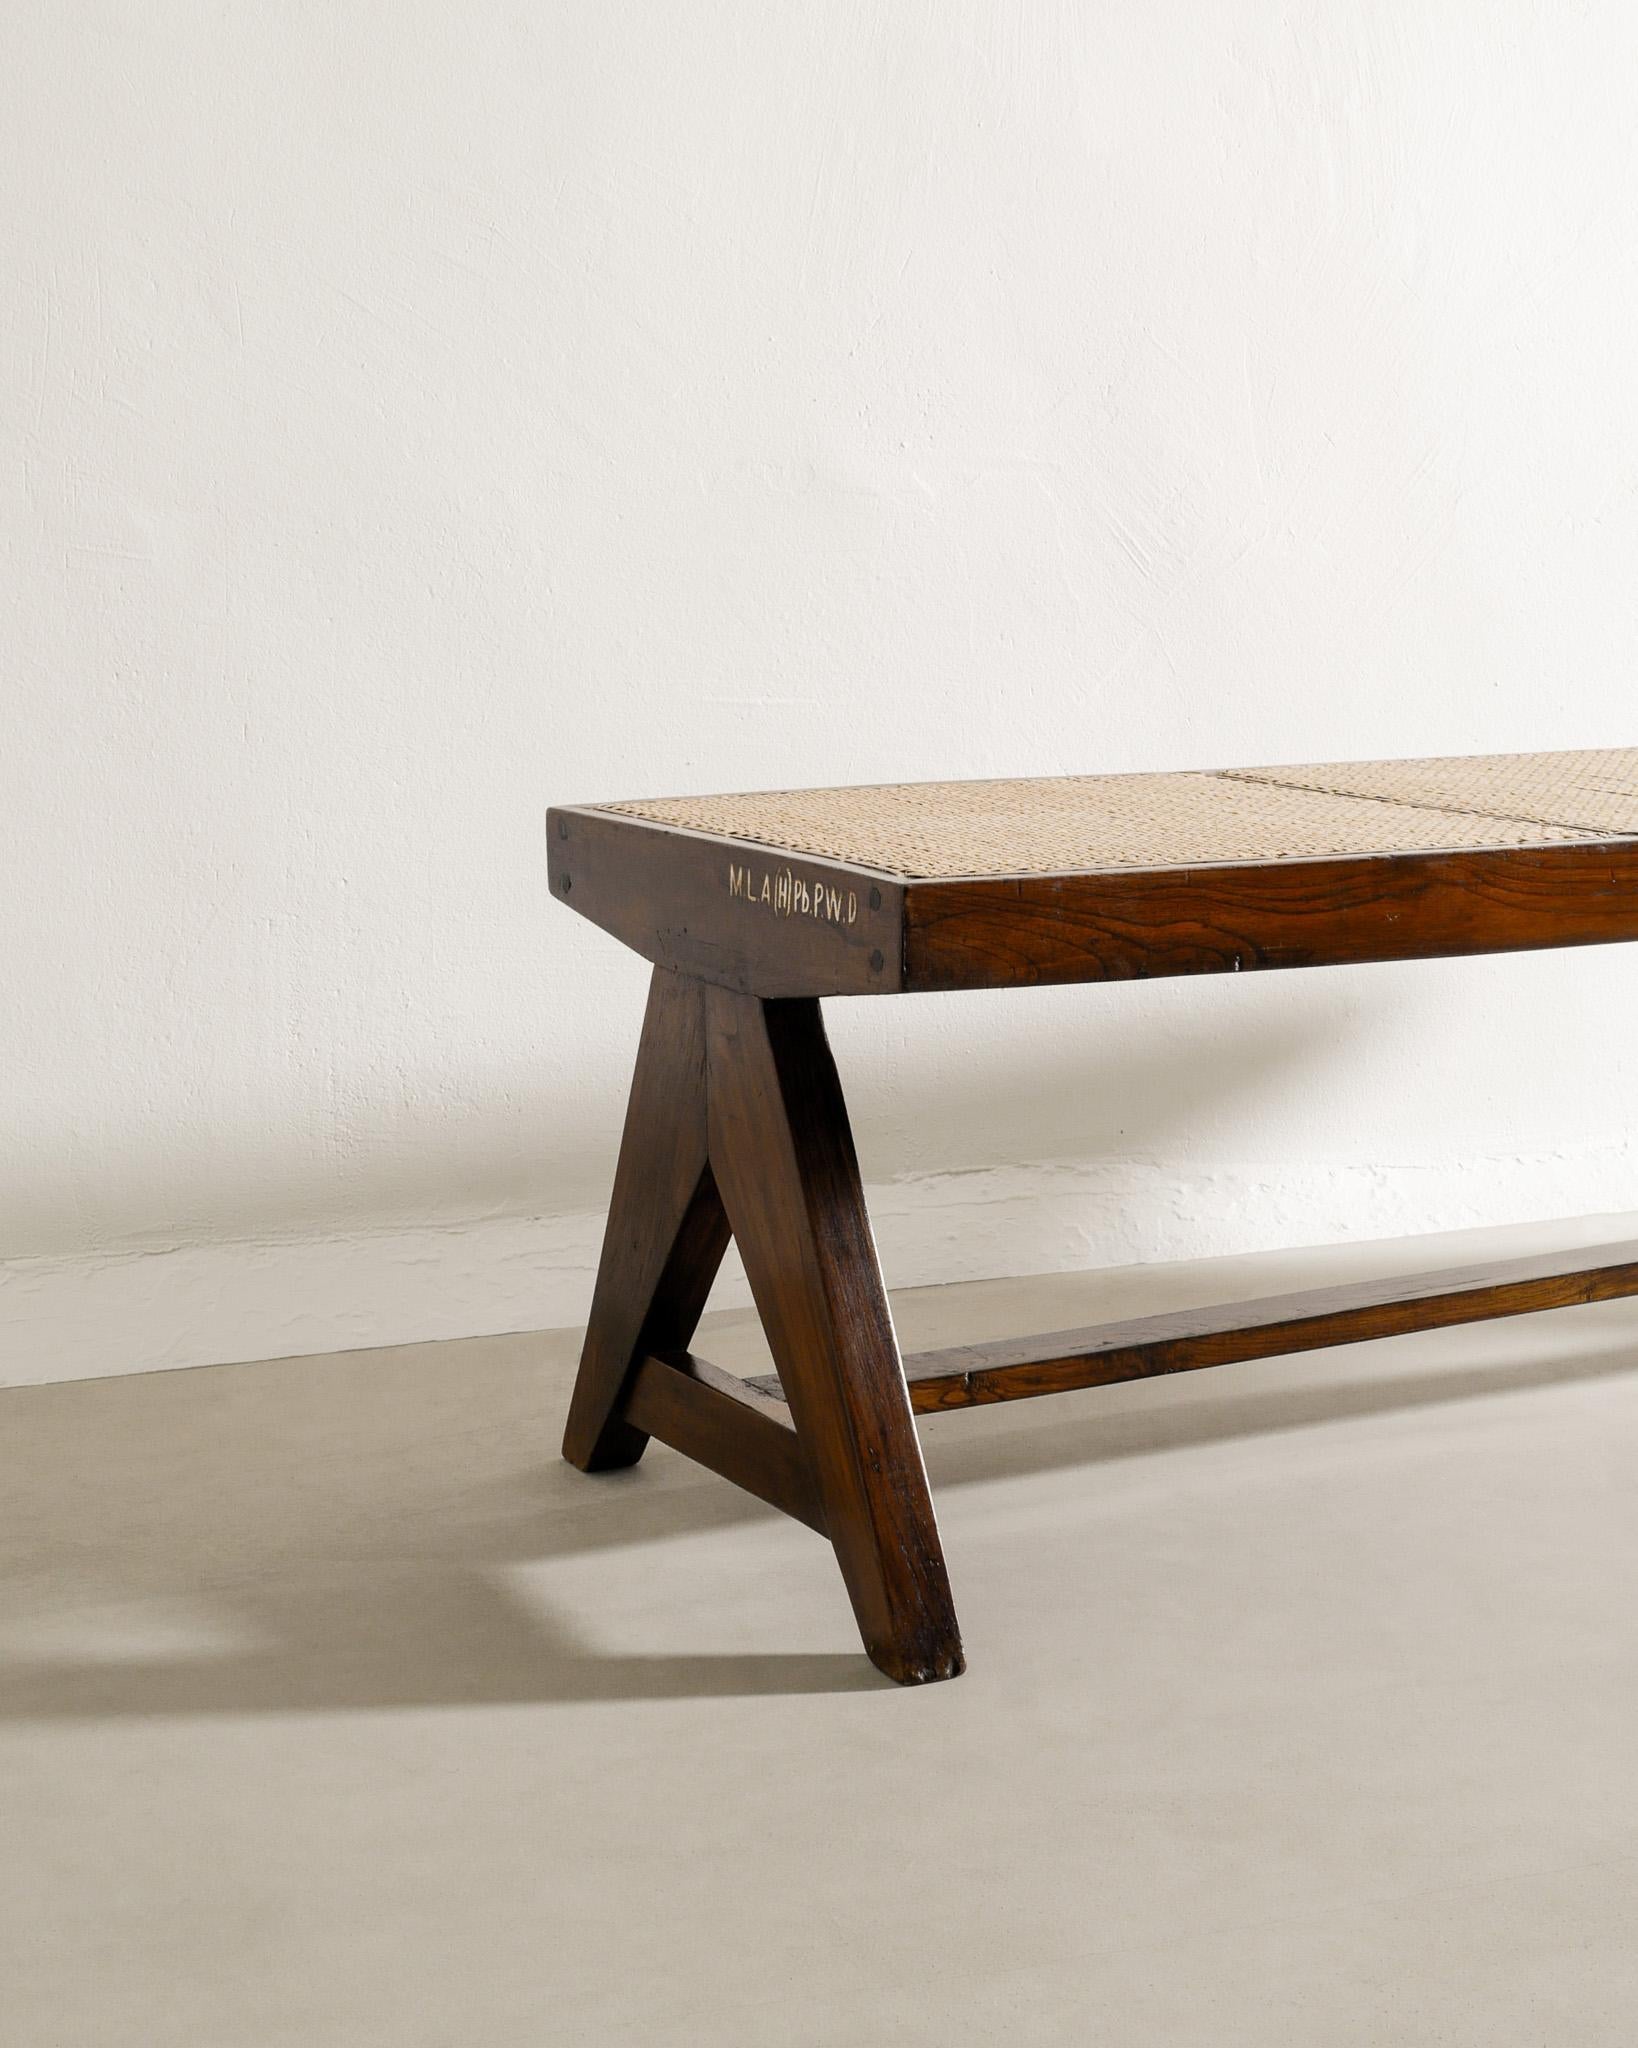 Indian Mid Century Wooden Teak & Rattan Bench by Pierre Jeanneret for Chandigarh, 1950s For Sale